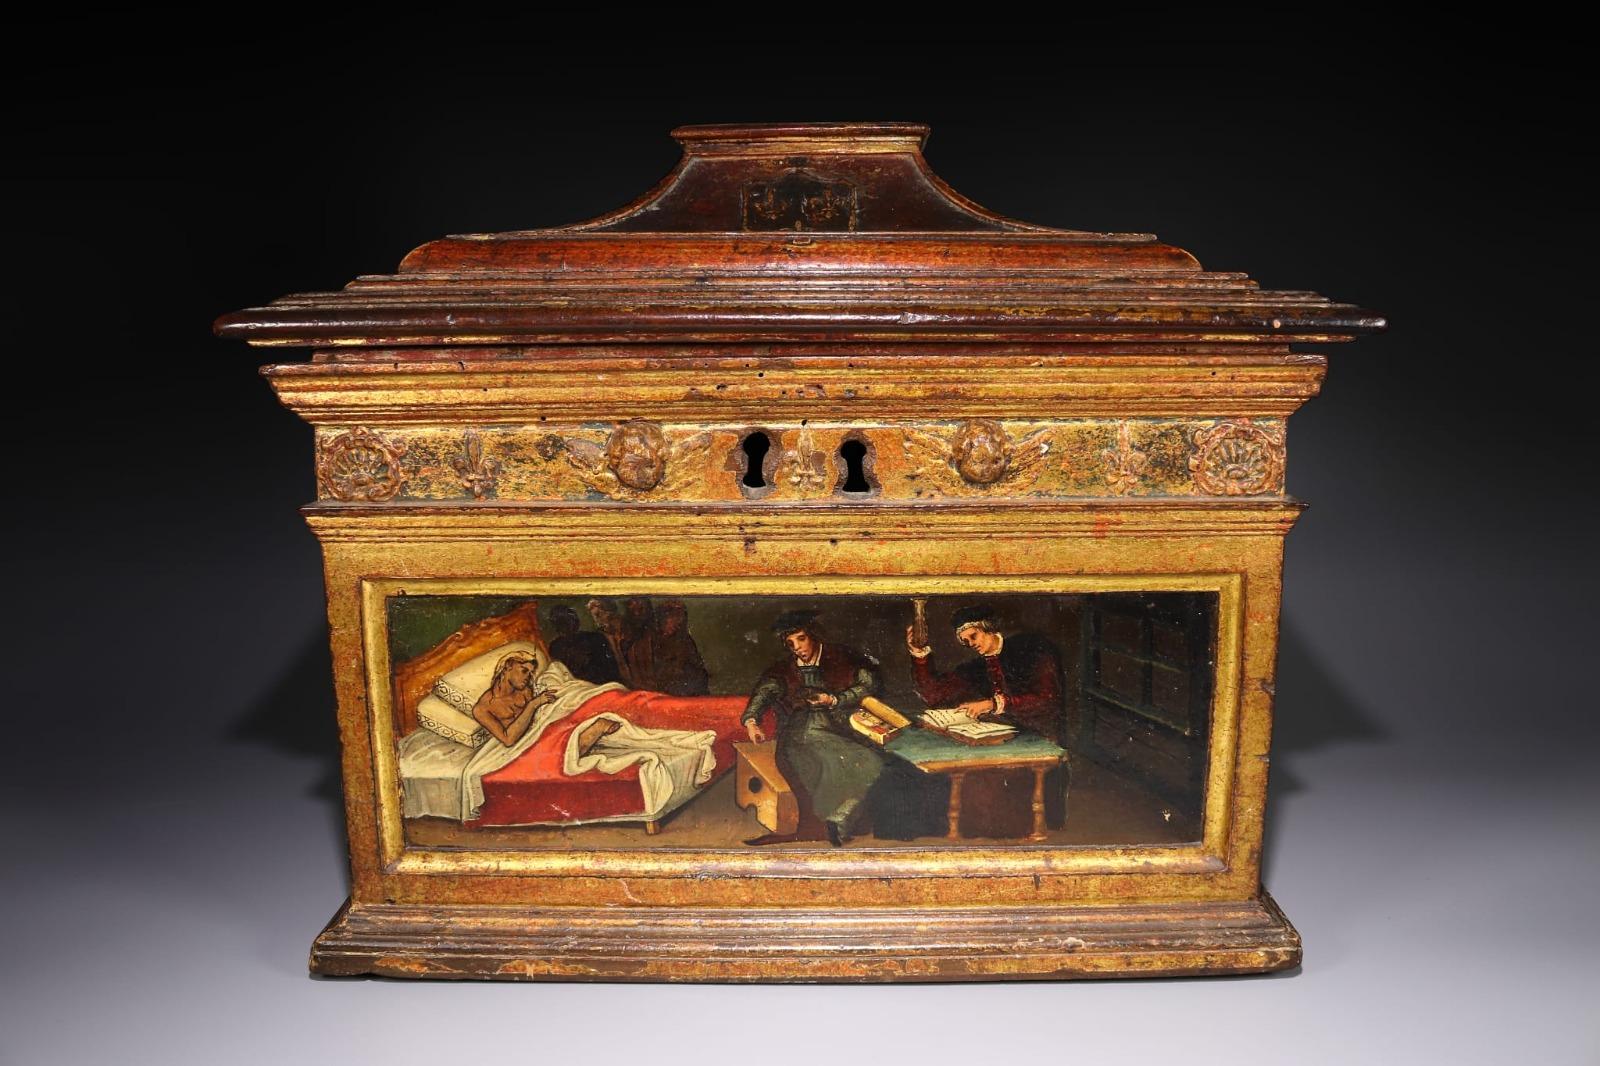 Hand-Crafted Important Renaissance Medical Box Spanish or Italian Workshop, Around 1550 For Sale